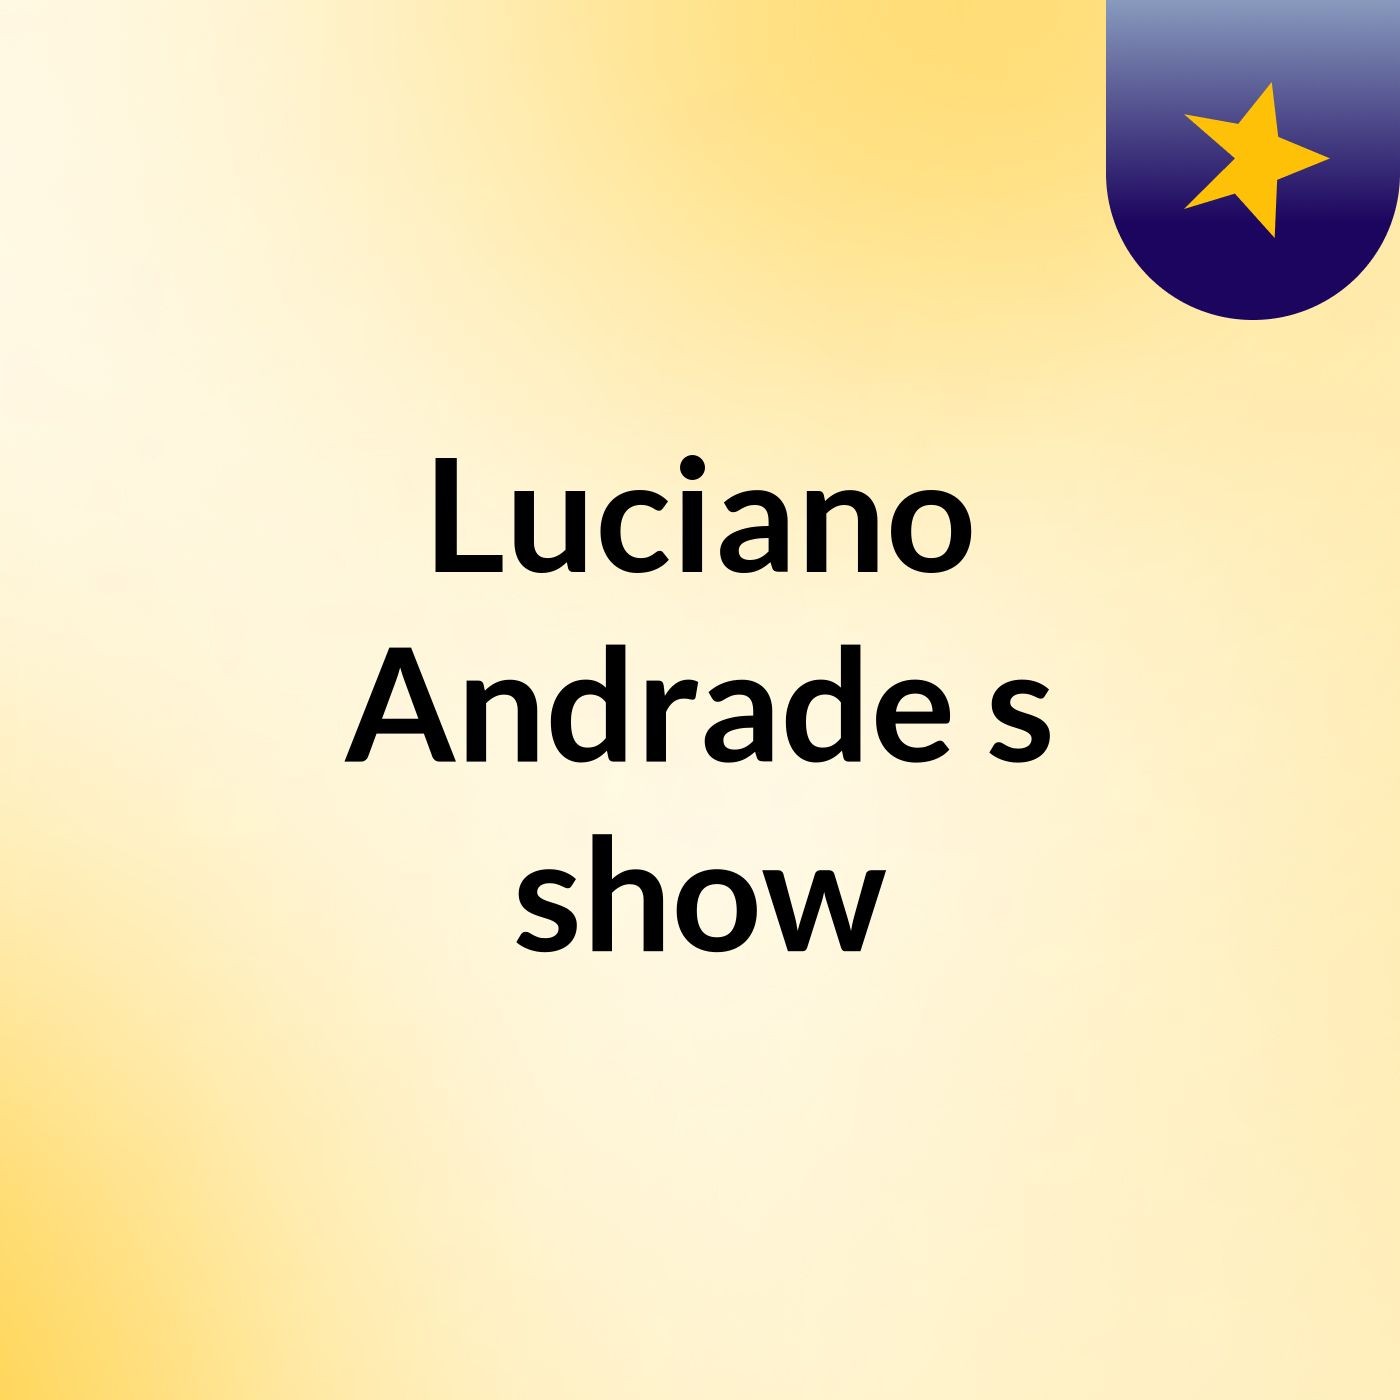 Luciano Andrade's show